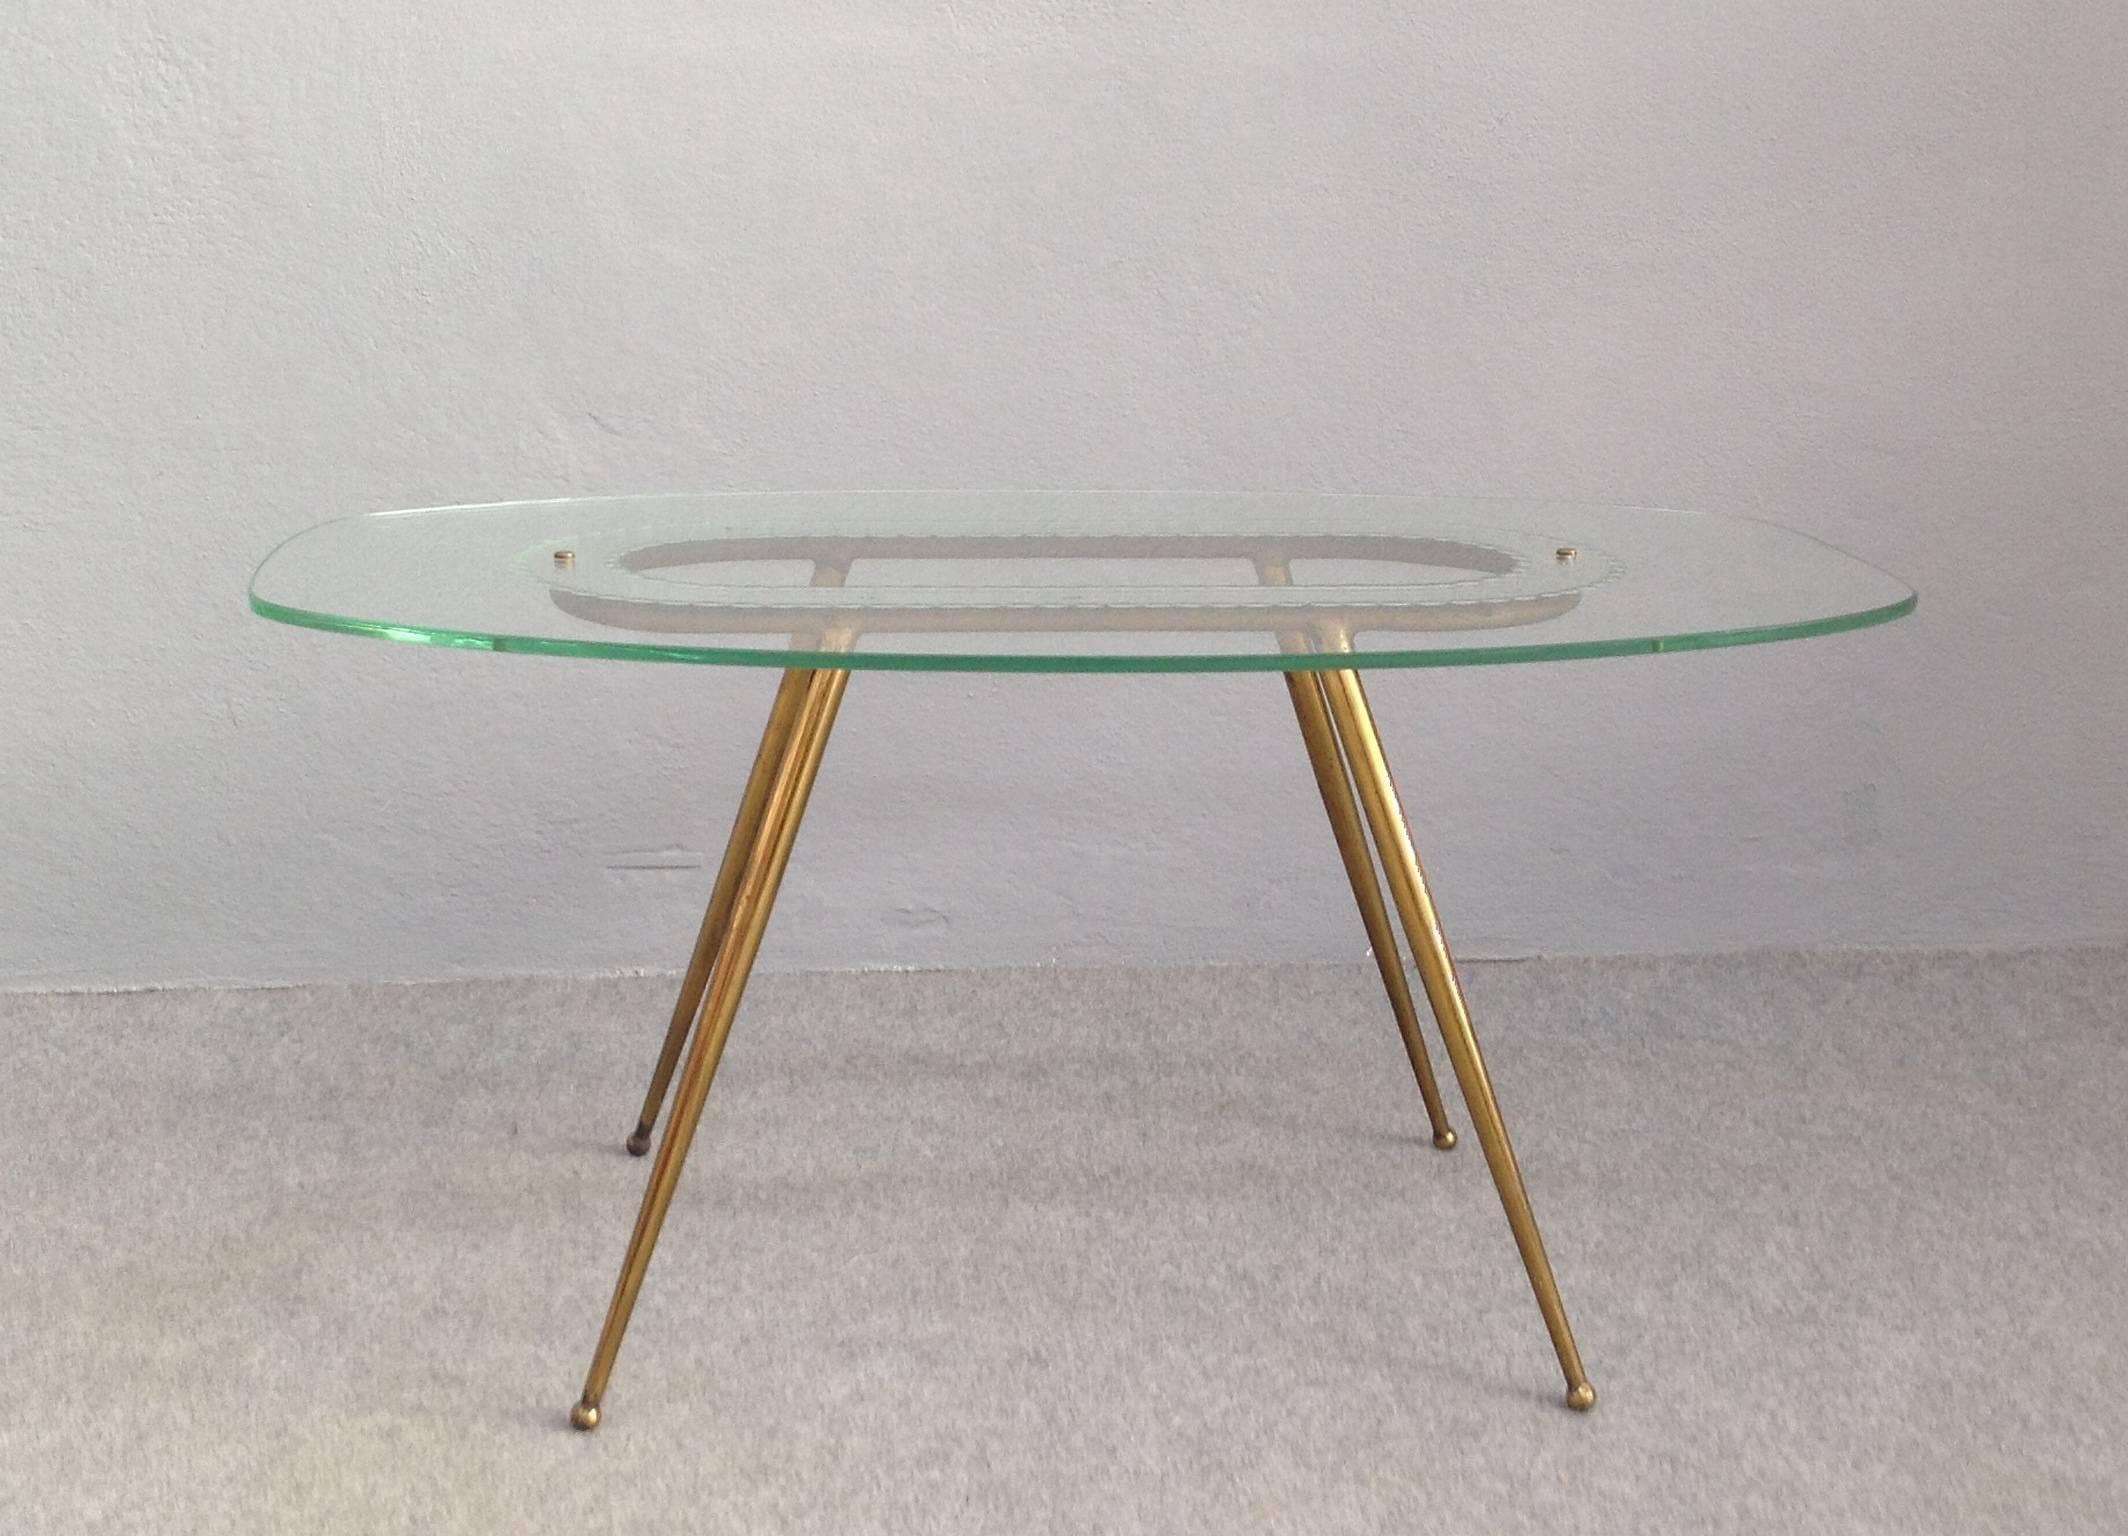 1950s glass and brass coffee table Fontana Arte style. Wonderful etched glass top, brass legs.